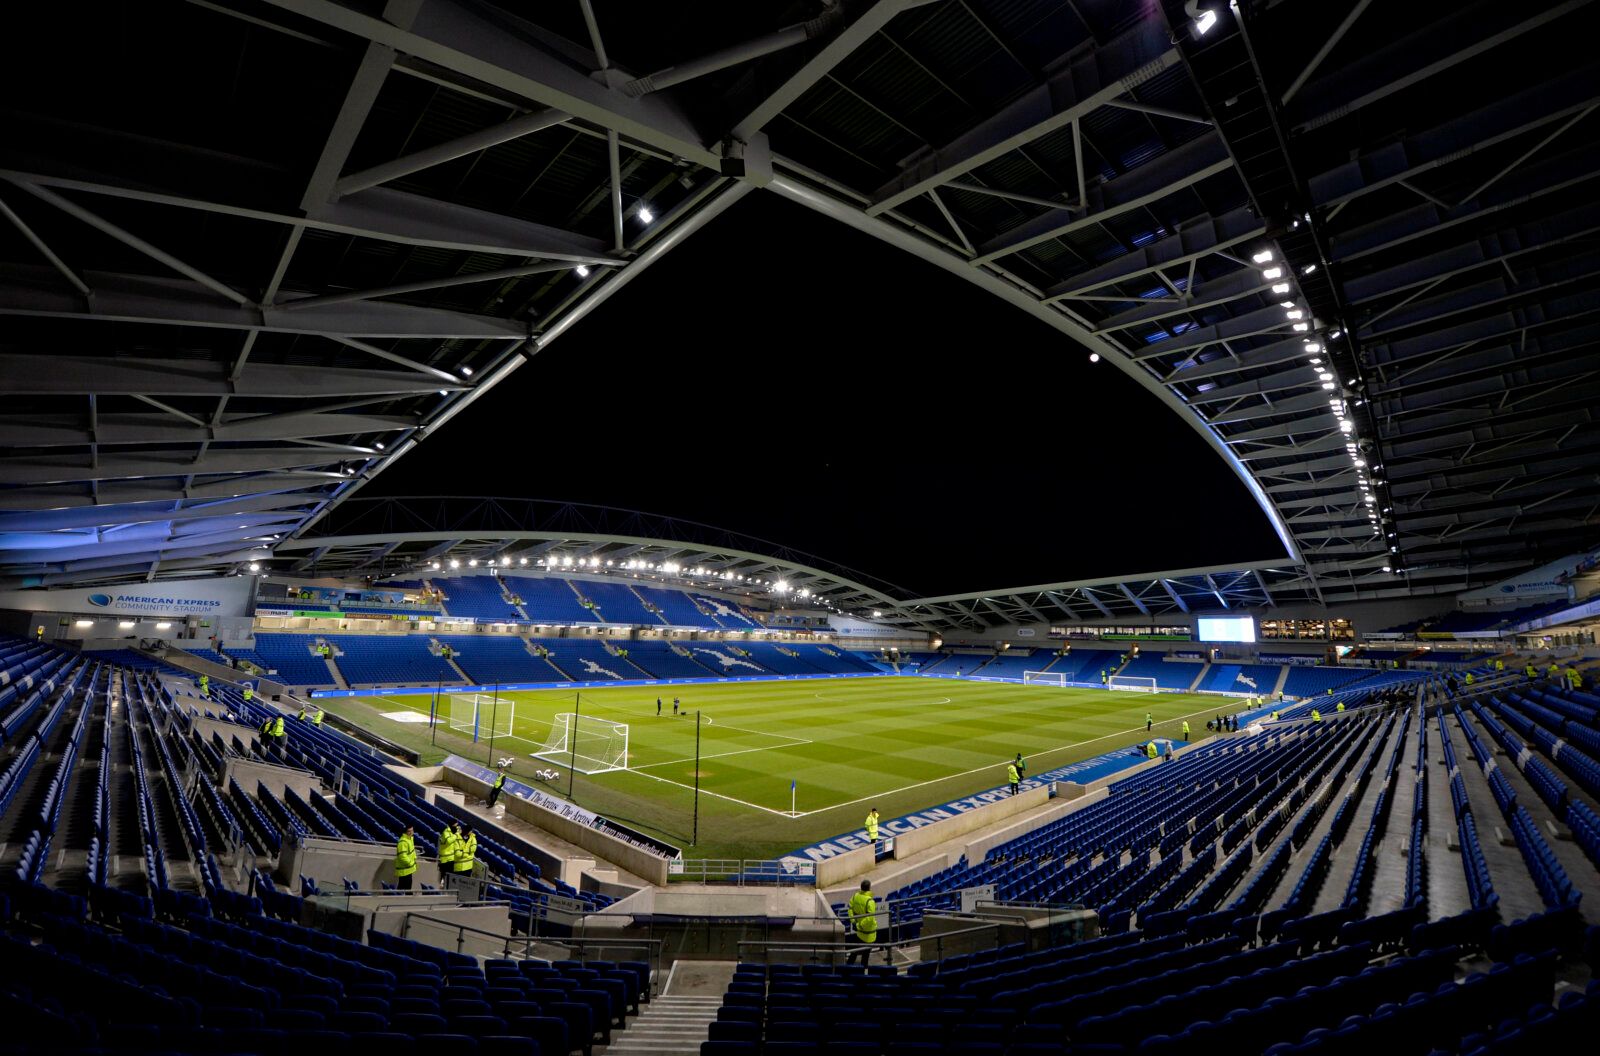 Football - Brighton &amp; Hove Albion v Derby County - Sky Bet Football League Championship - The American Express Community Stadium - 3/3/15 
General view of The Amex Community Stadium  before the game 
Mandatory Credit: Action Images / Adam Holt 
Livepic 
EDITORIAL USE ONLY. No use with unauthorized audio, video, data, fixture lists, club/league logos or 